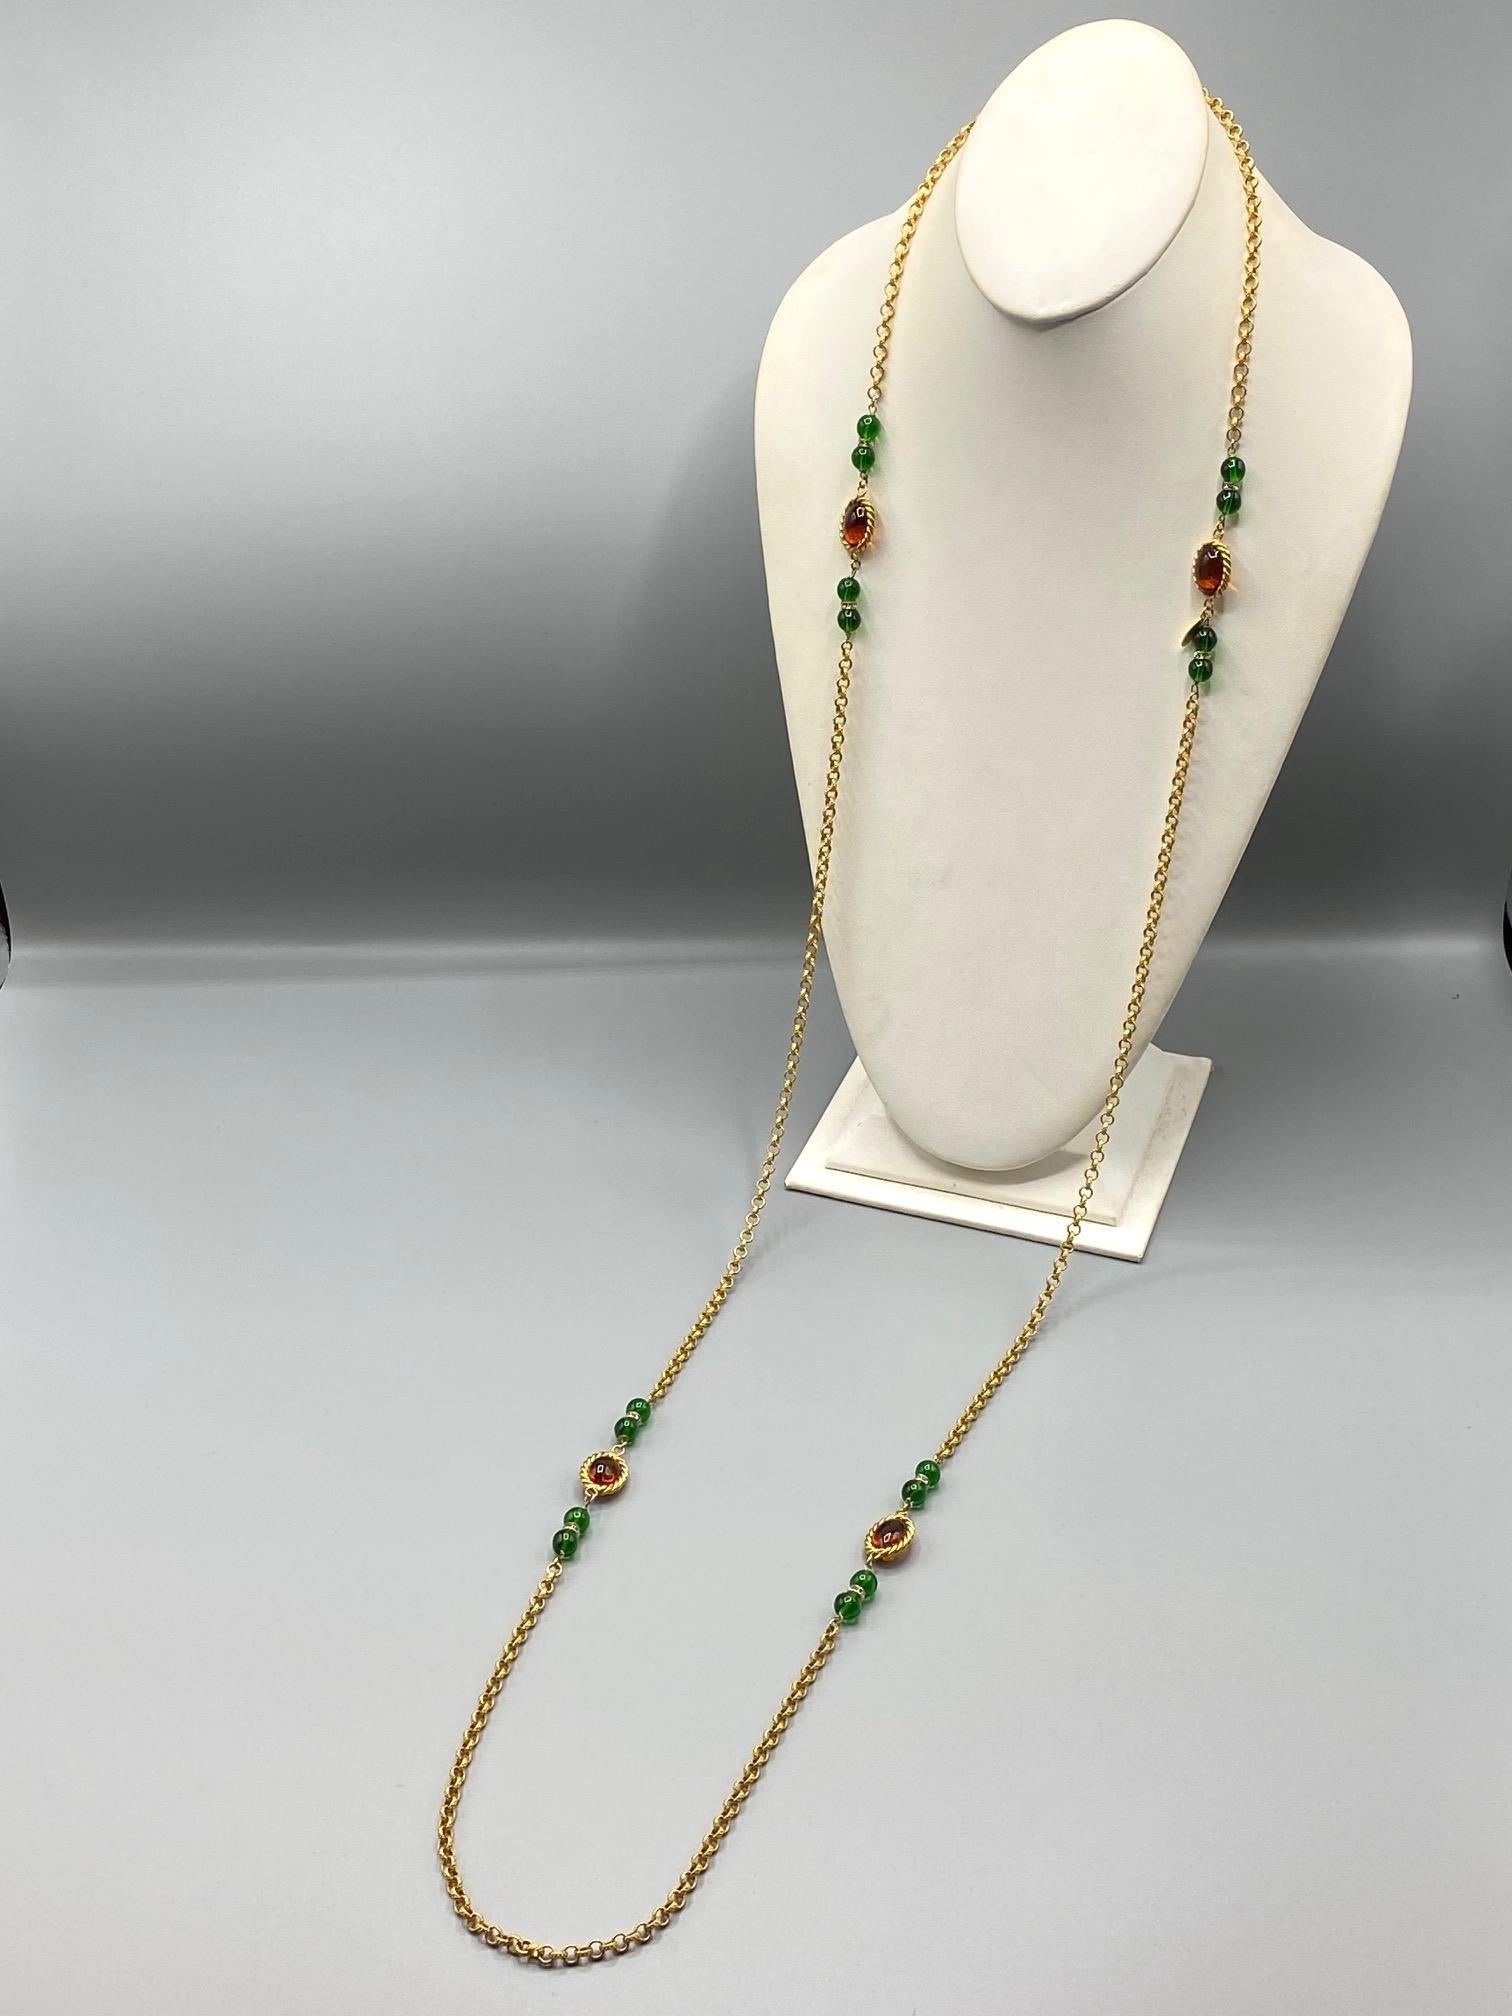 Presented is an elegant and easy to wear Chanel sautoir and Gripoix necklace from 1986. In 1986 Karl Lagerfeld was hired as the design director for Chanel. In turn, he hired the jewelry designer Victoire de Castellane as head jewelry designer. That